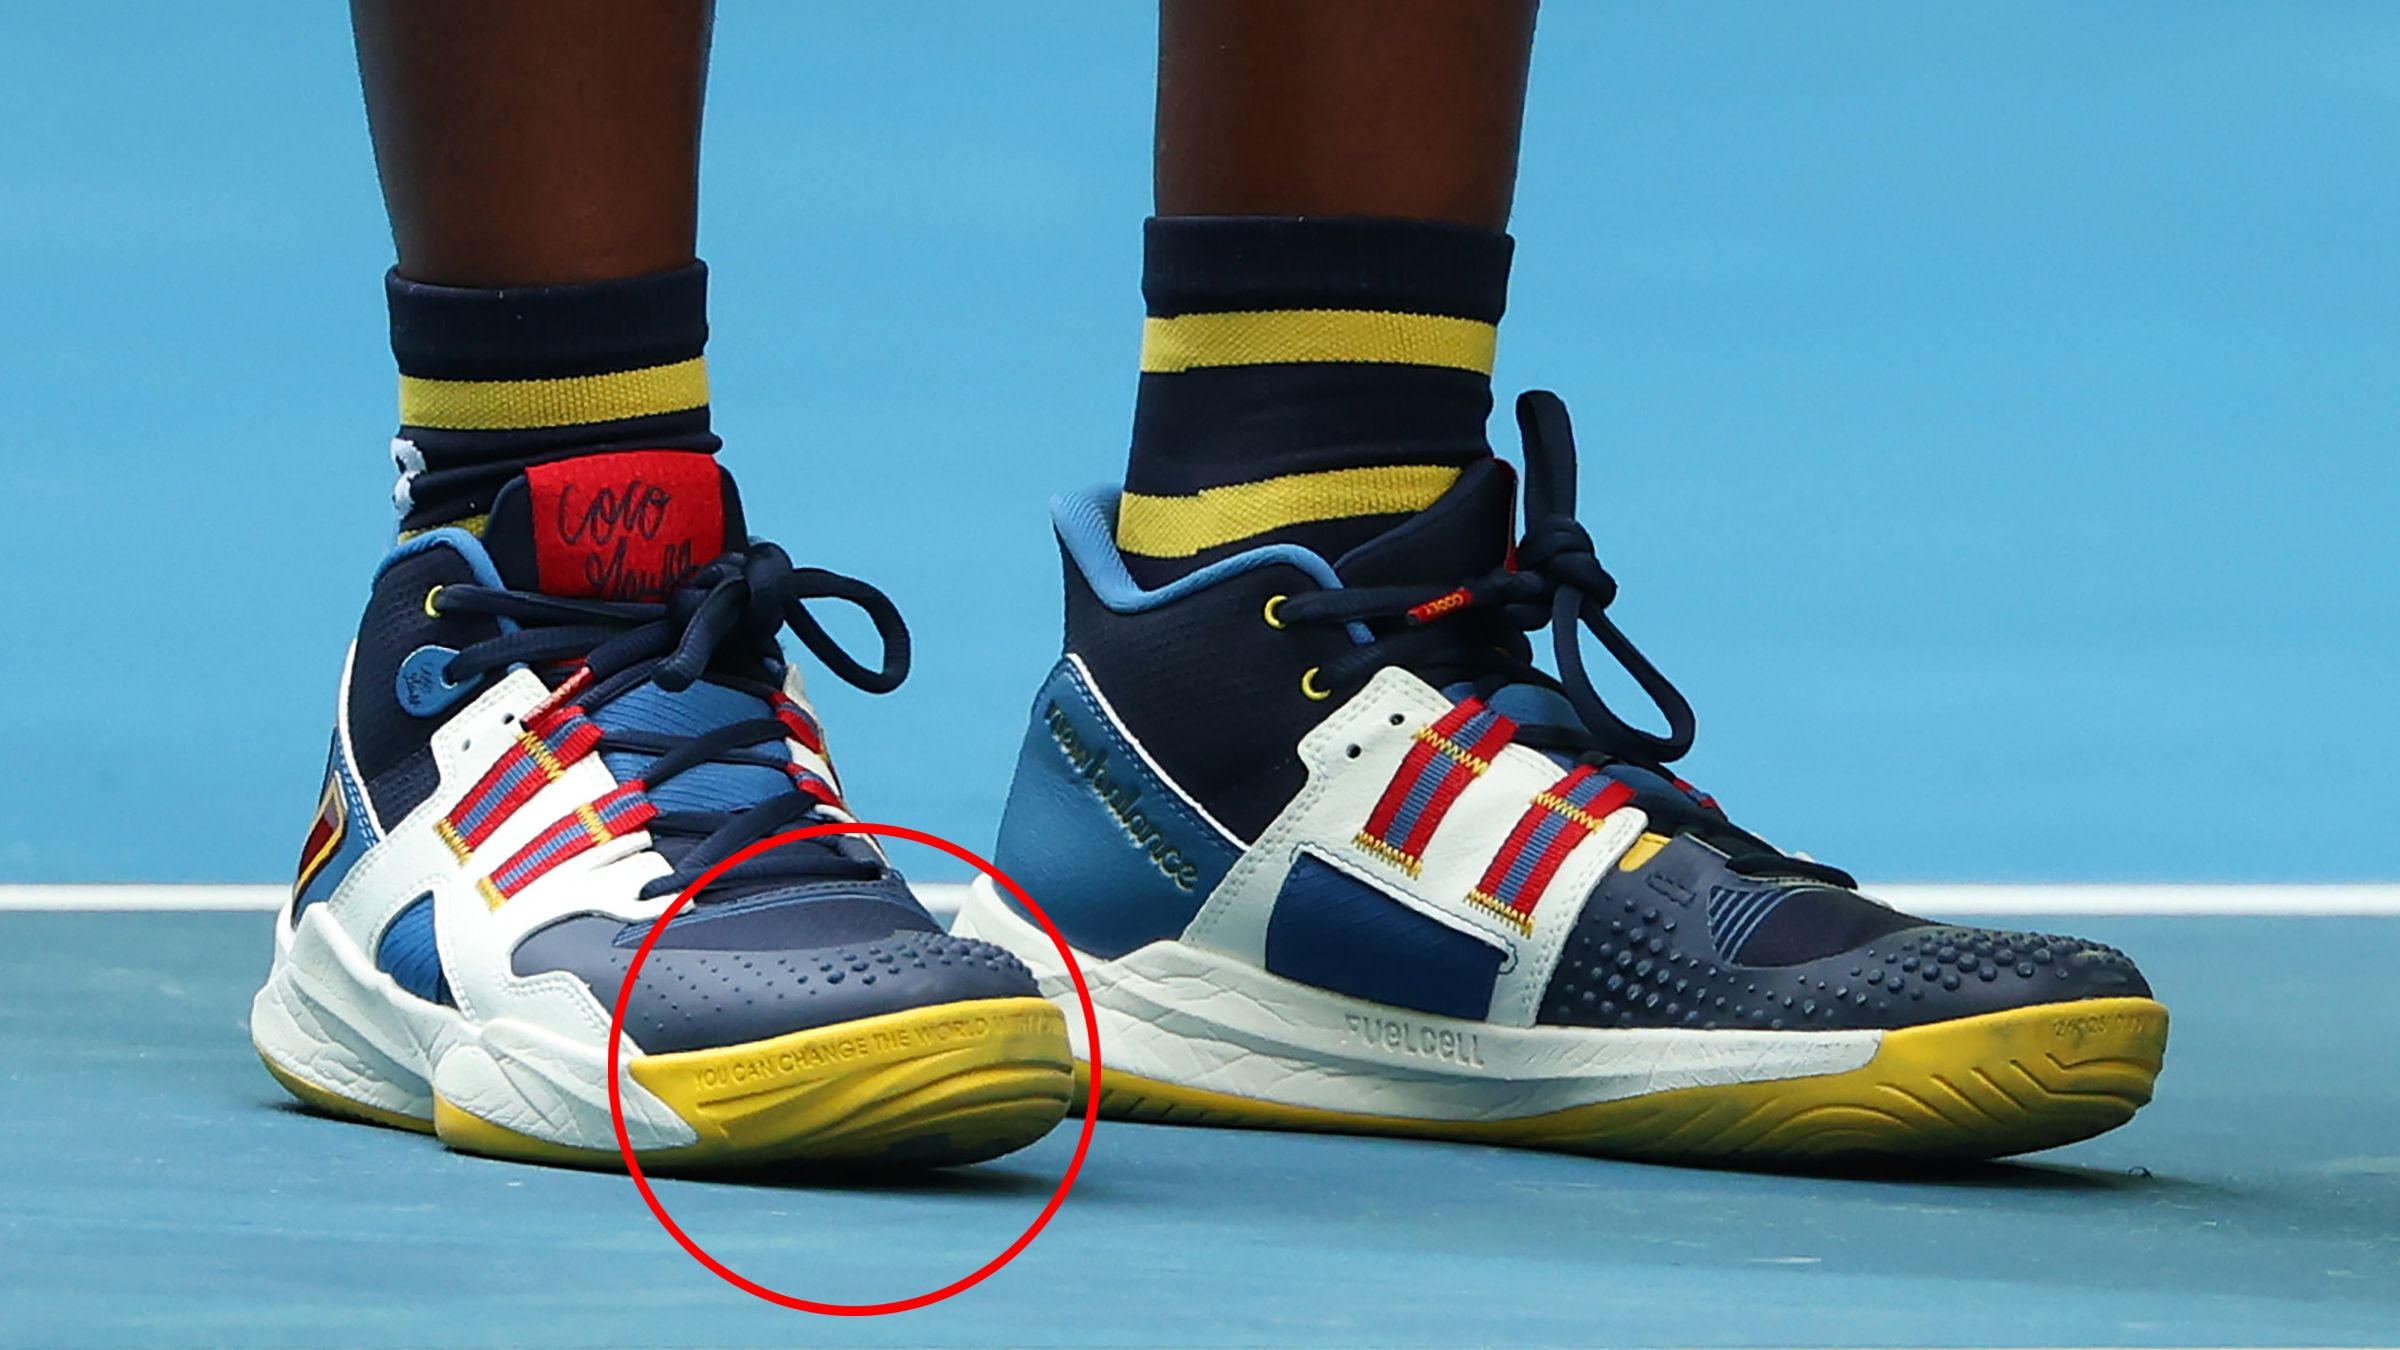 Coco Gauff wears her signature Coco CG1 shoes.